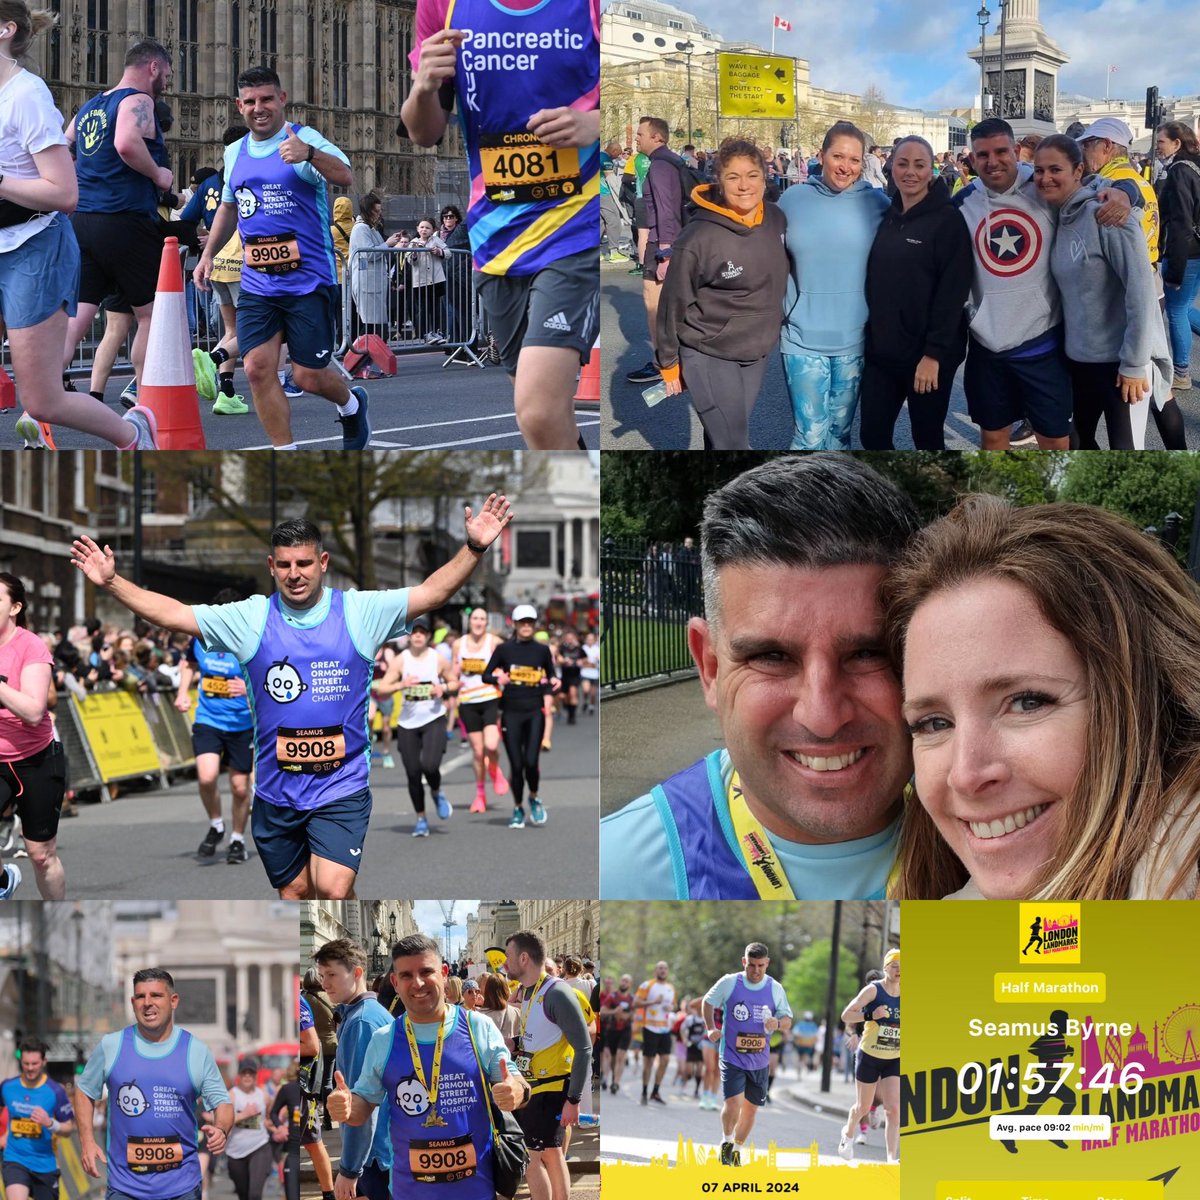 GAME, SET & SMASHED @londonlandmarkshalf Couldn’t have done it without the support of my wife and Team Reilly. Thank you to everyone for your generosity: justgiving.com/fundraising/se… it means the world to us! And always remember: EVERYDAY IS A CHANCE TO MAKE A DIFFERENCE!